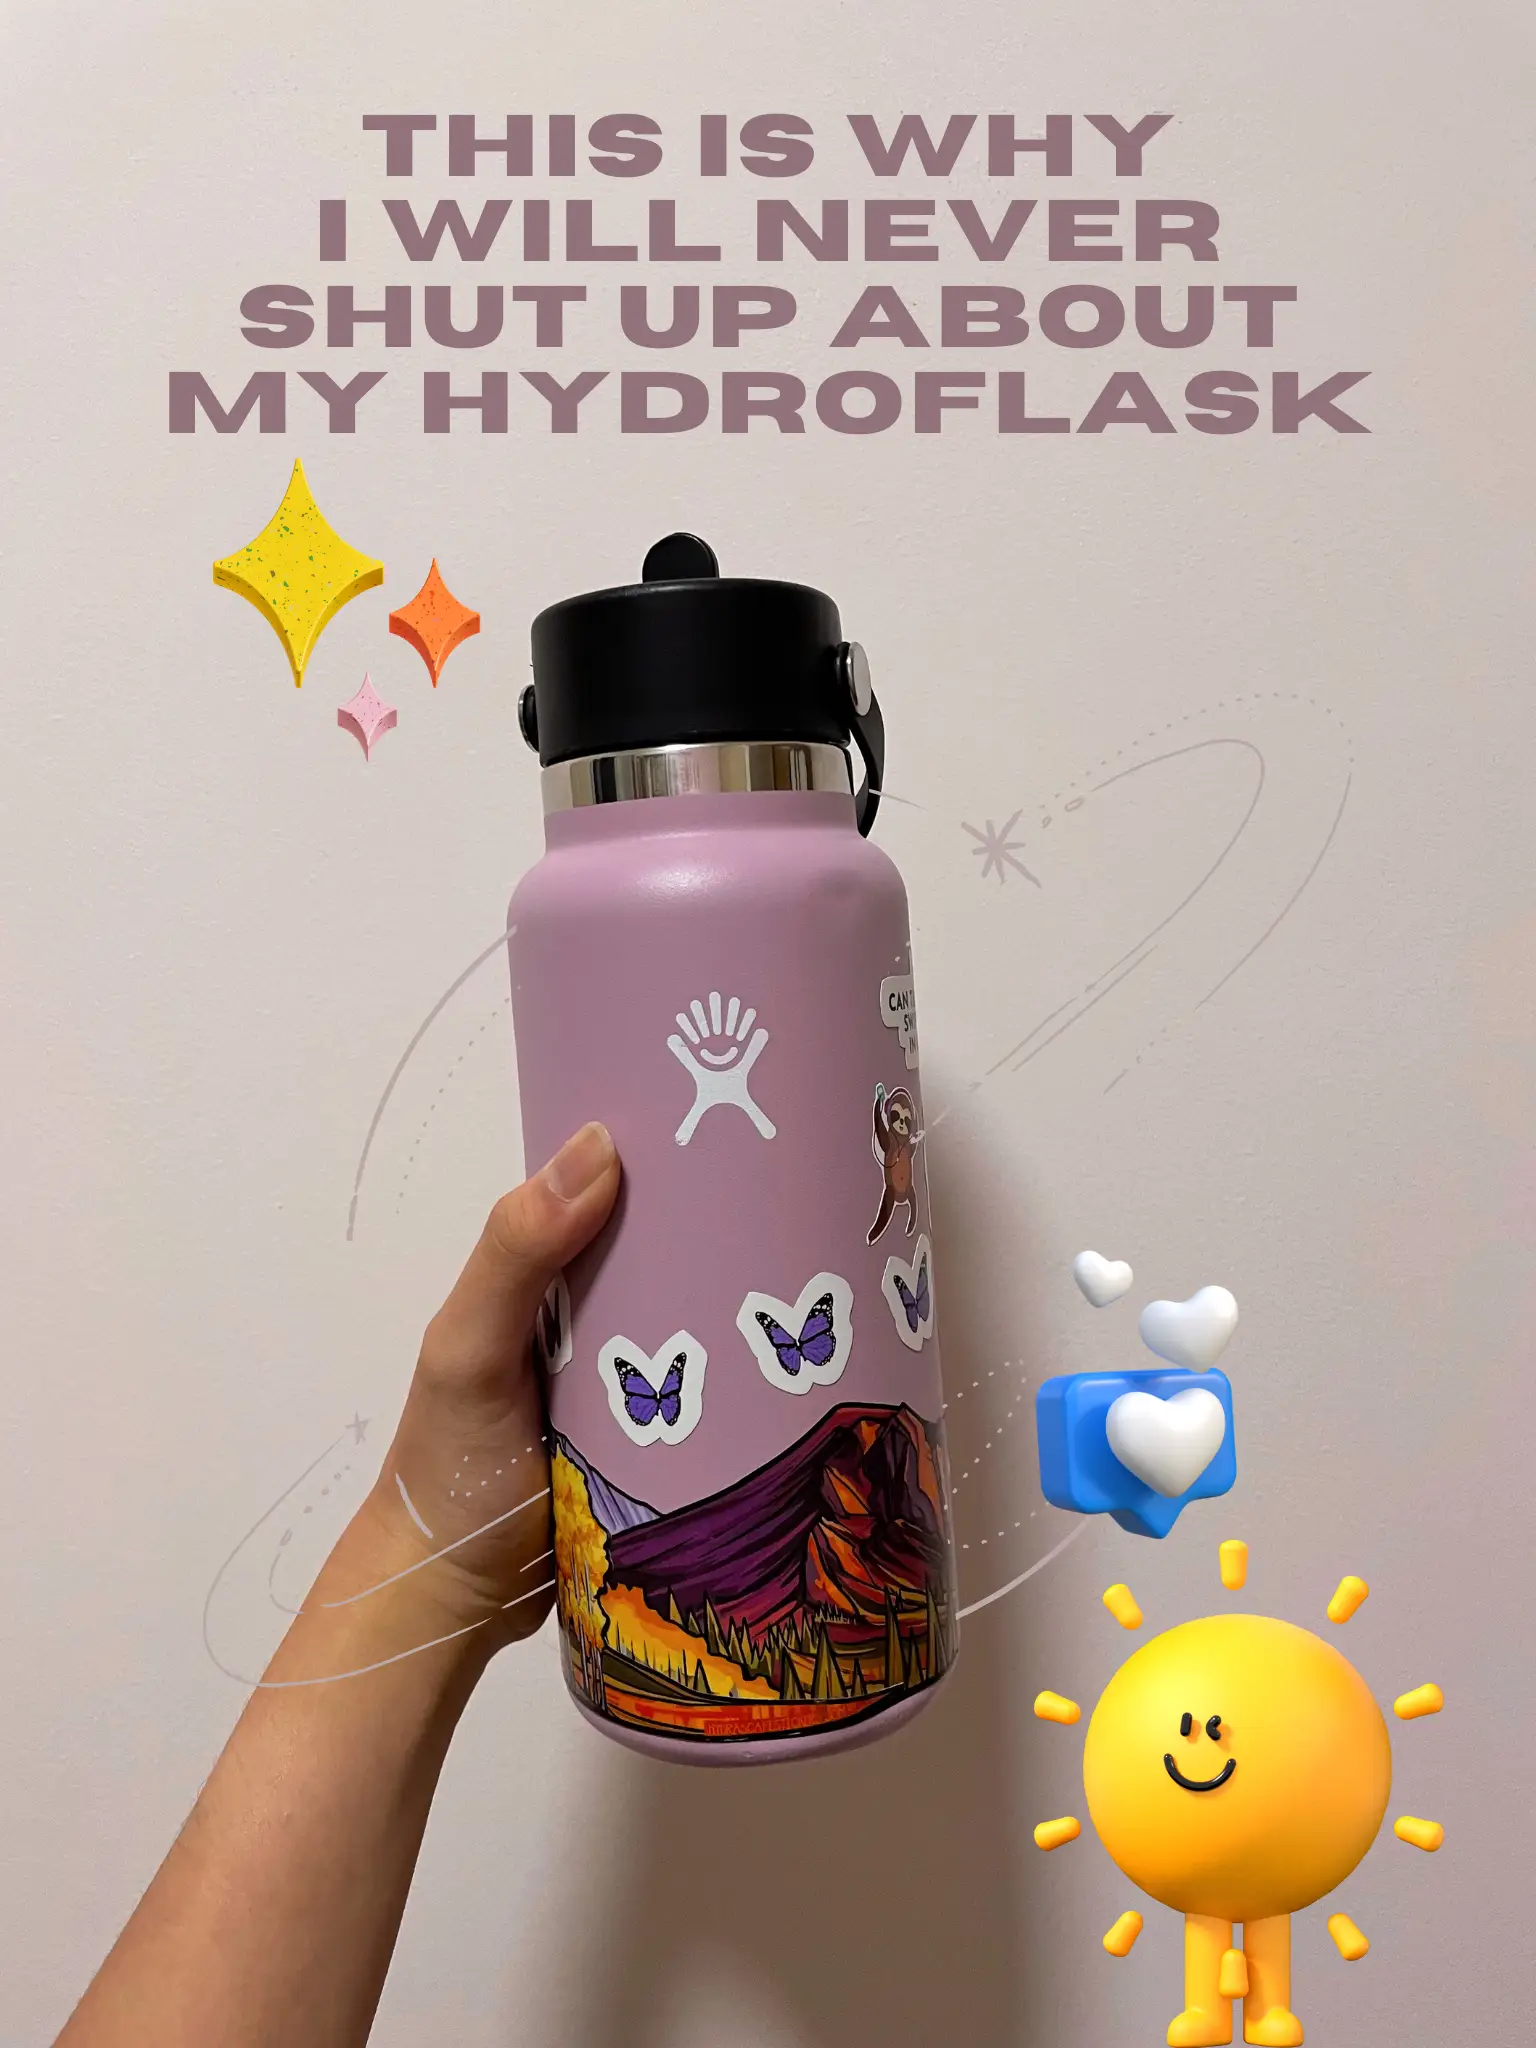 ✧˖*° DO NOT GET HYDROFLASK *° ✧˖